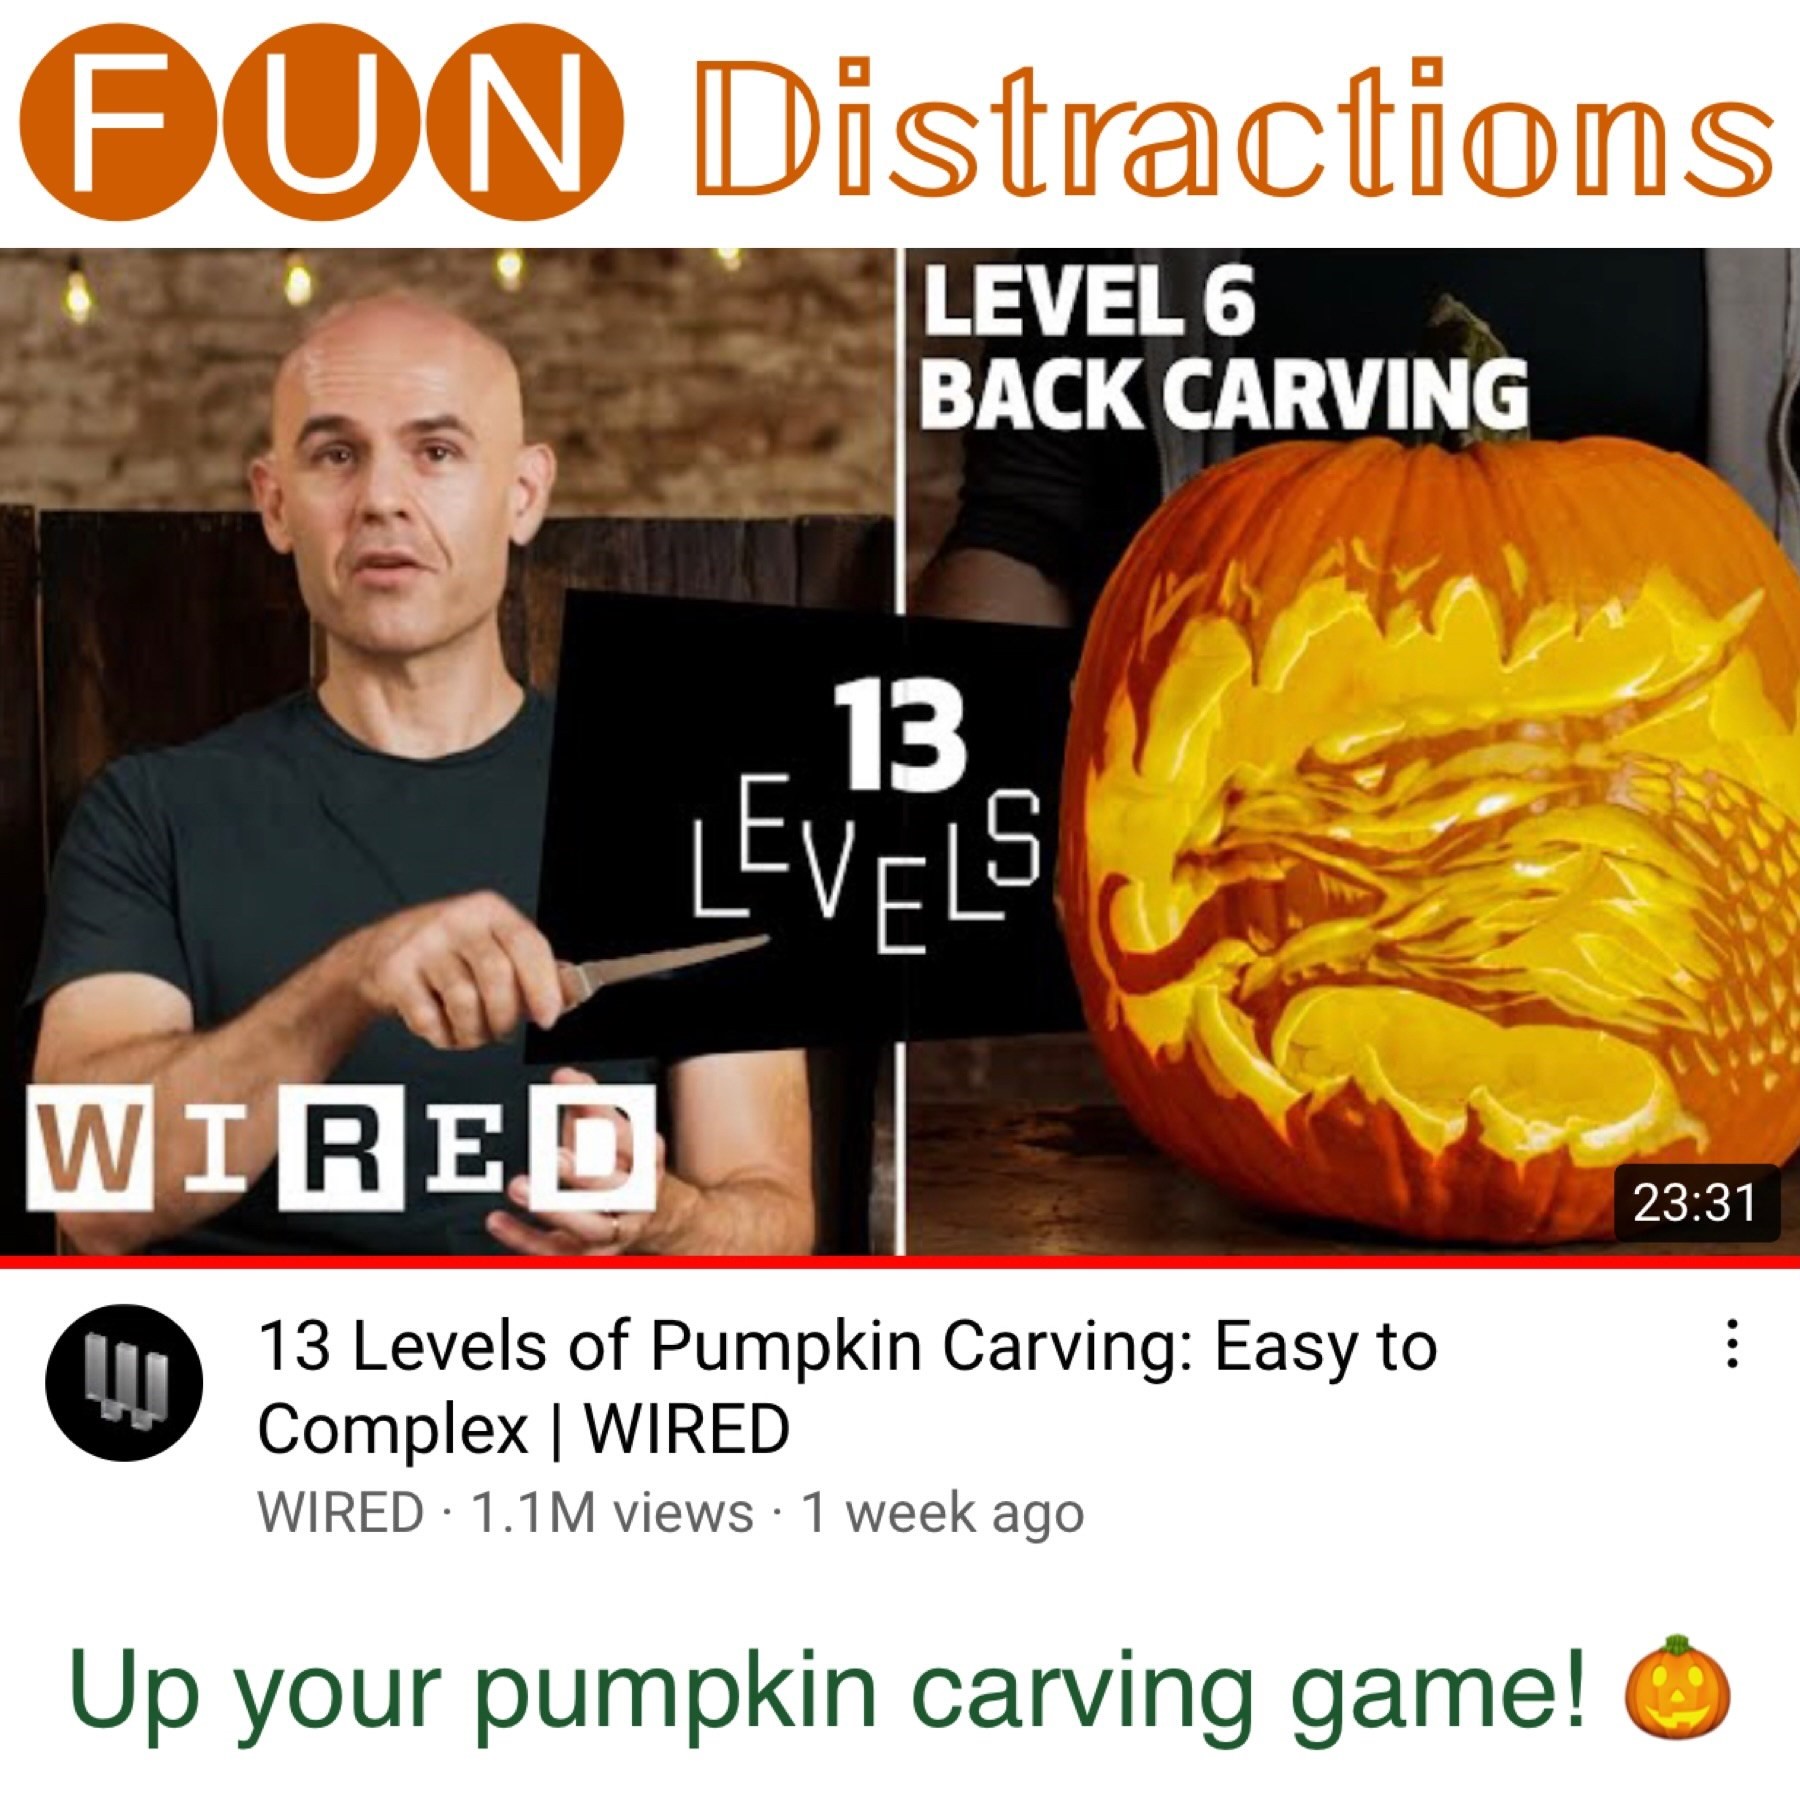 Image advertising the Library’s FUN Distraction series post on complex pumpkin carving